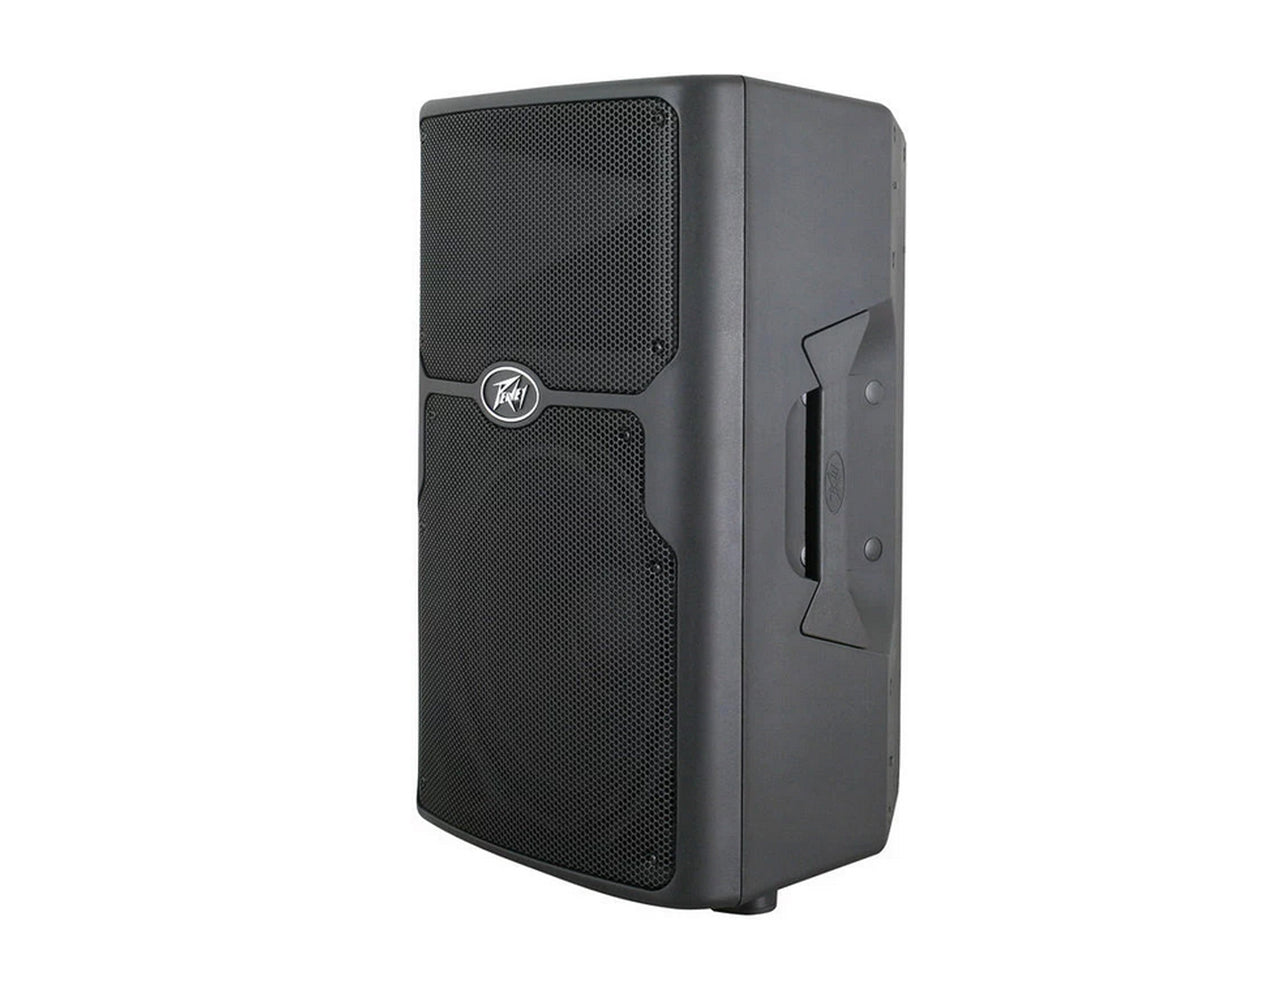 2 PVXP15 DSP 15" Powered Speaker 830W with 1.4" Compression Driver,+ XLR Cables